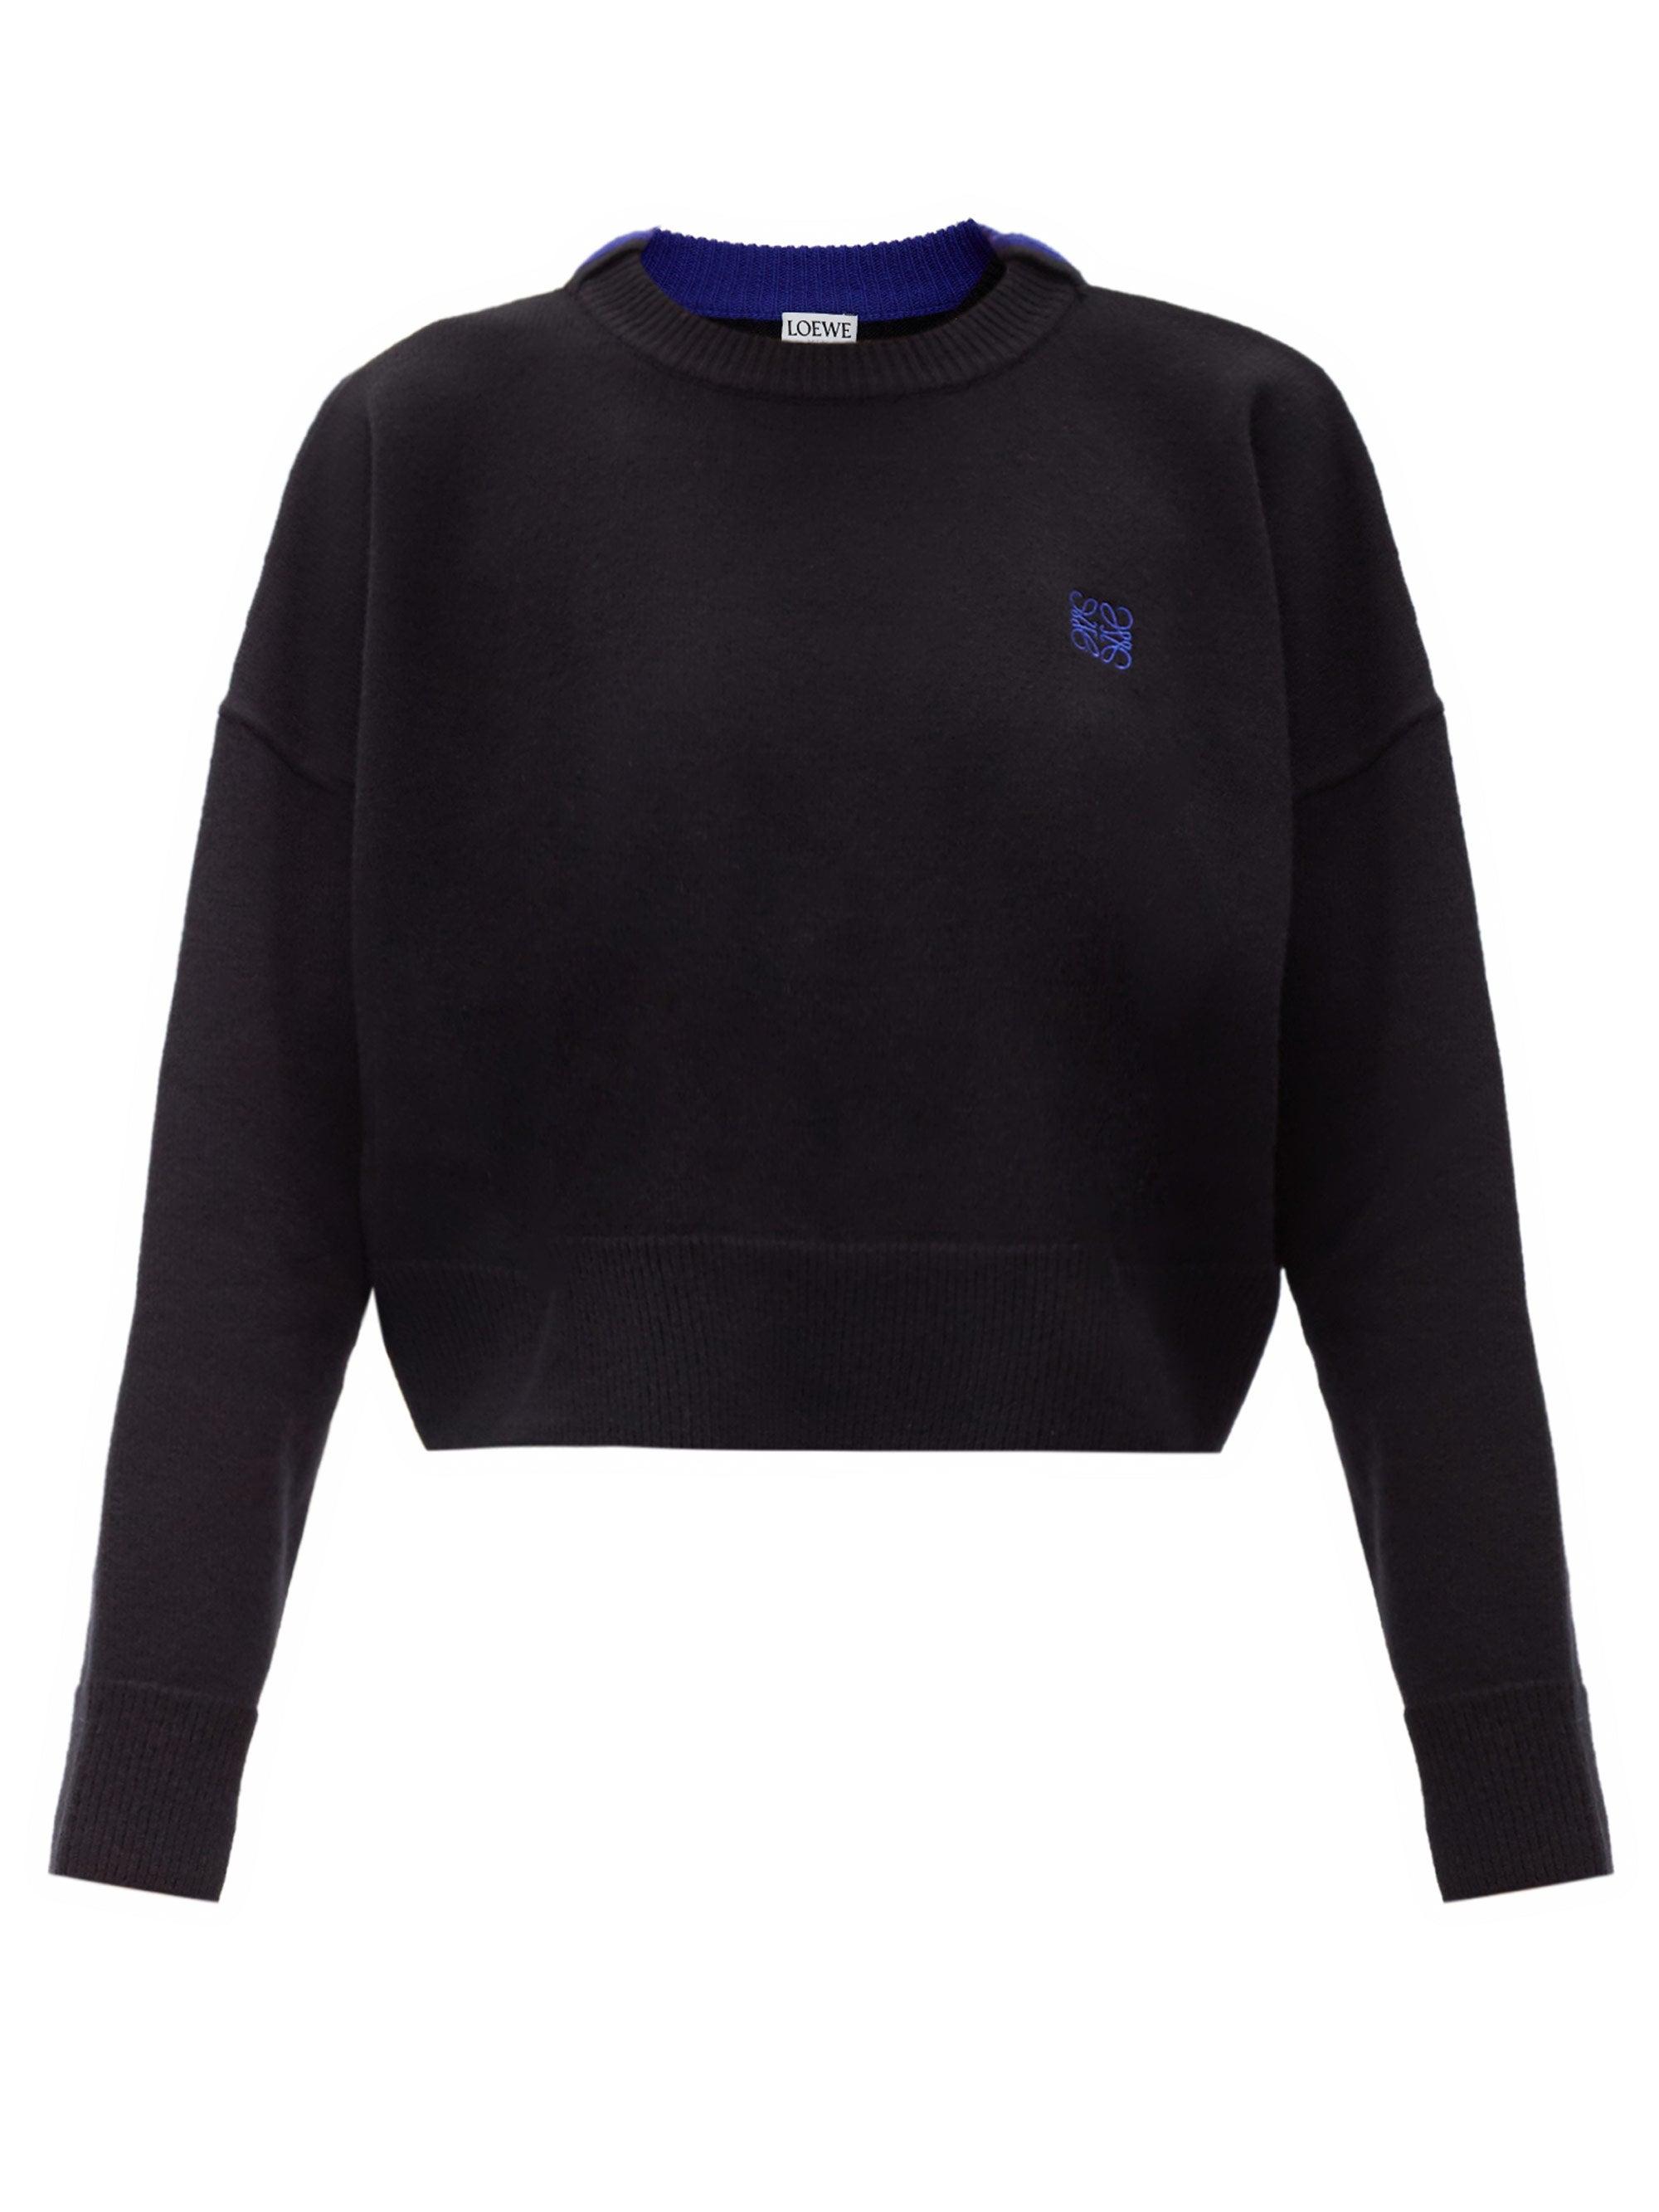 Loewe Cropped Anagram-embroidered Wool Sweater in Black - Lyst